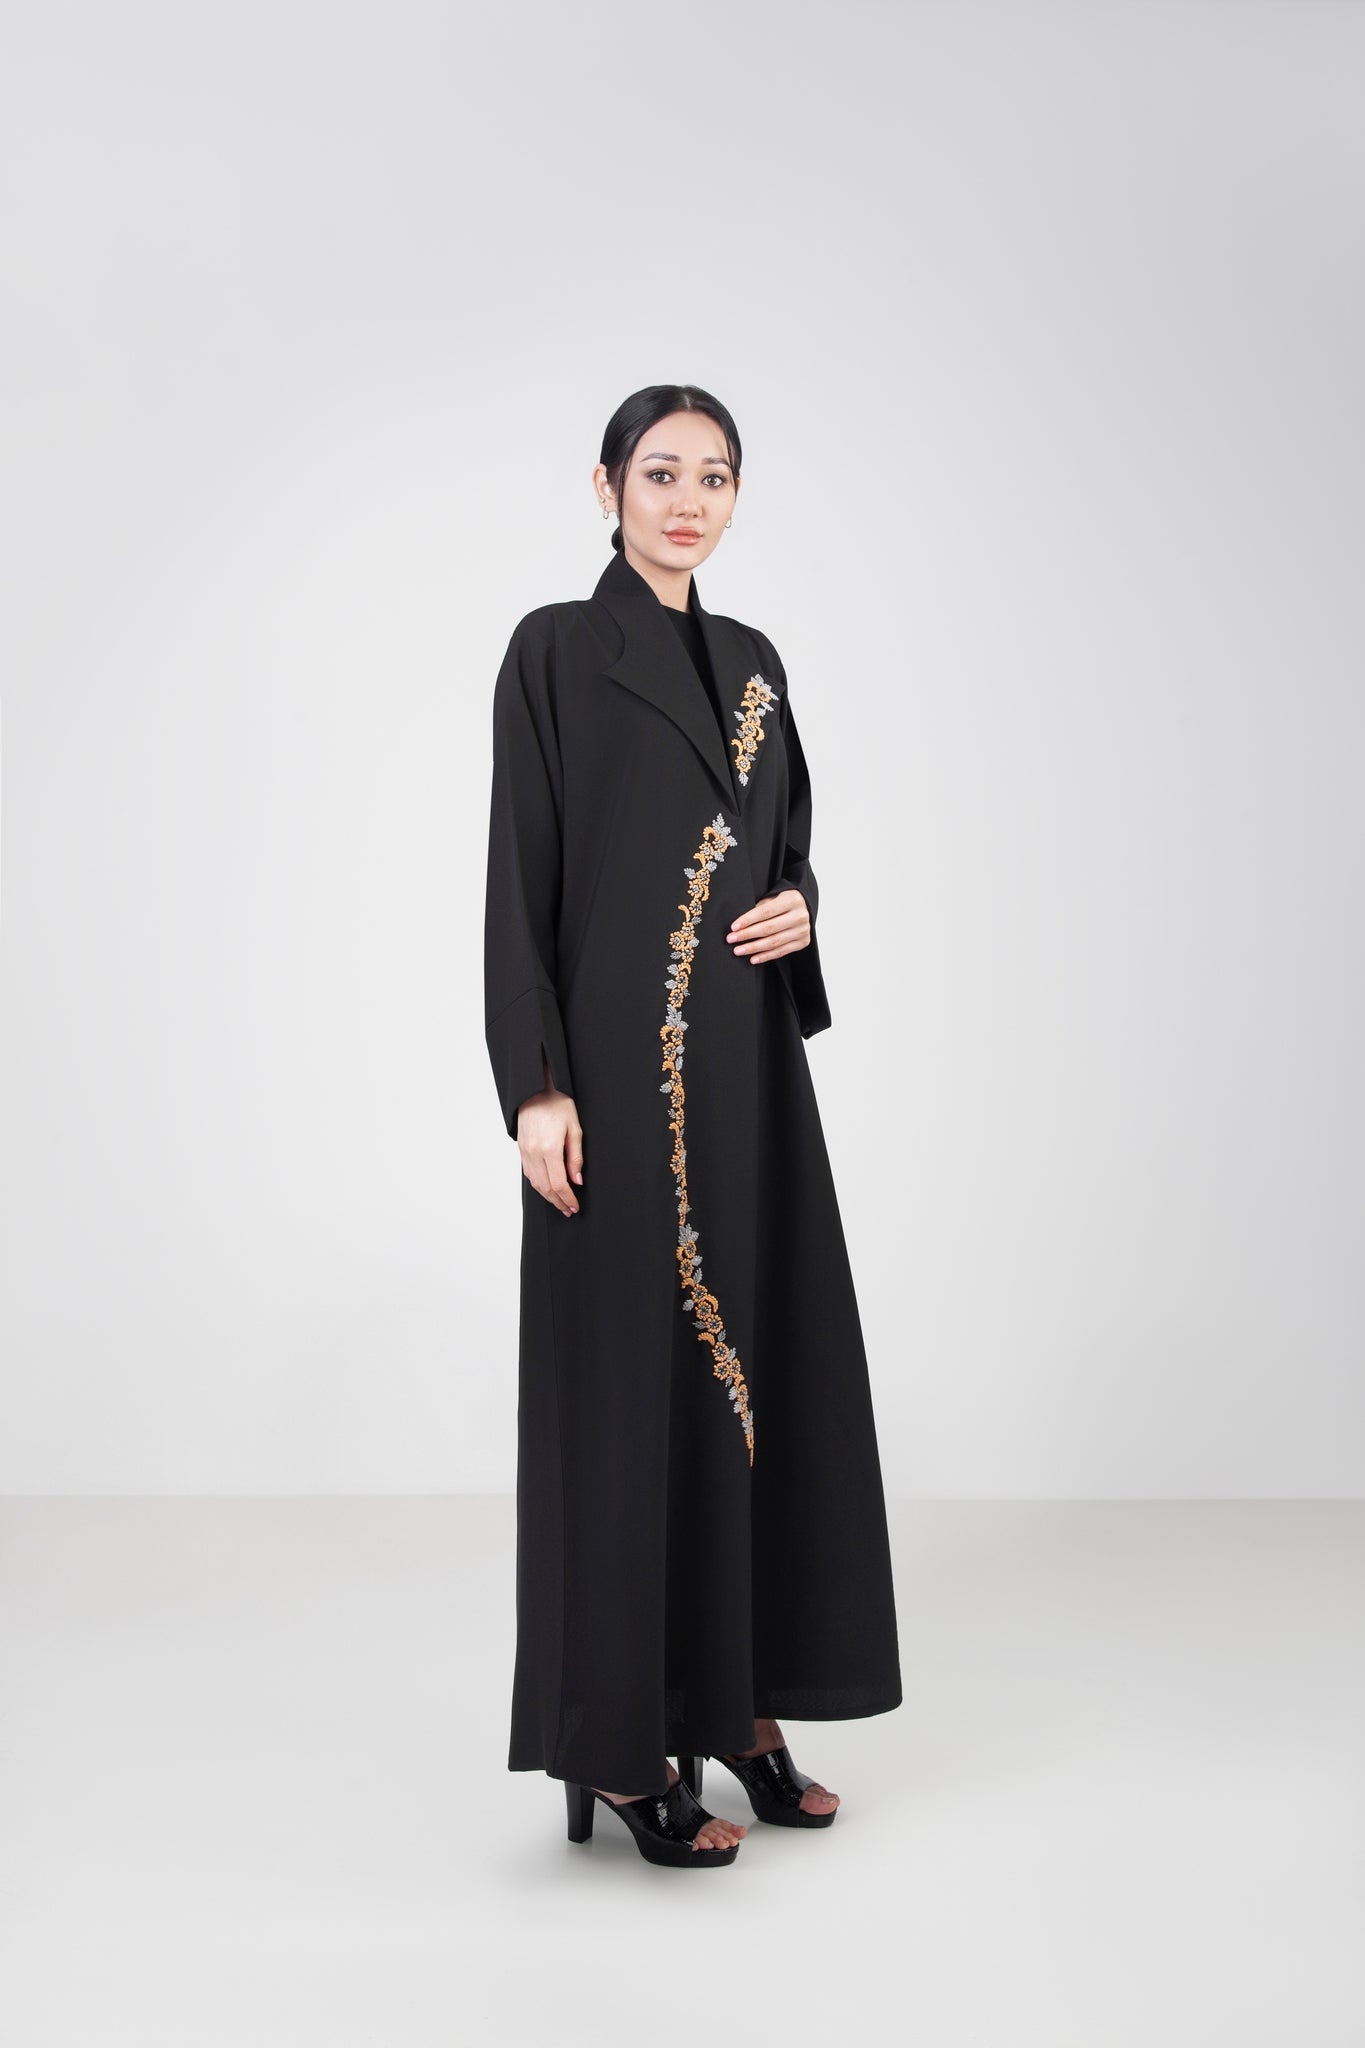 Cut Abaya With Floral Embroidery Design